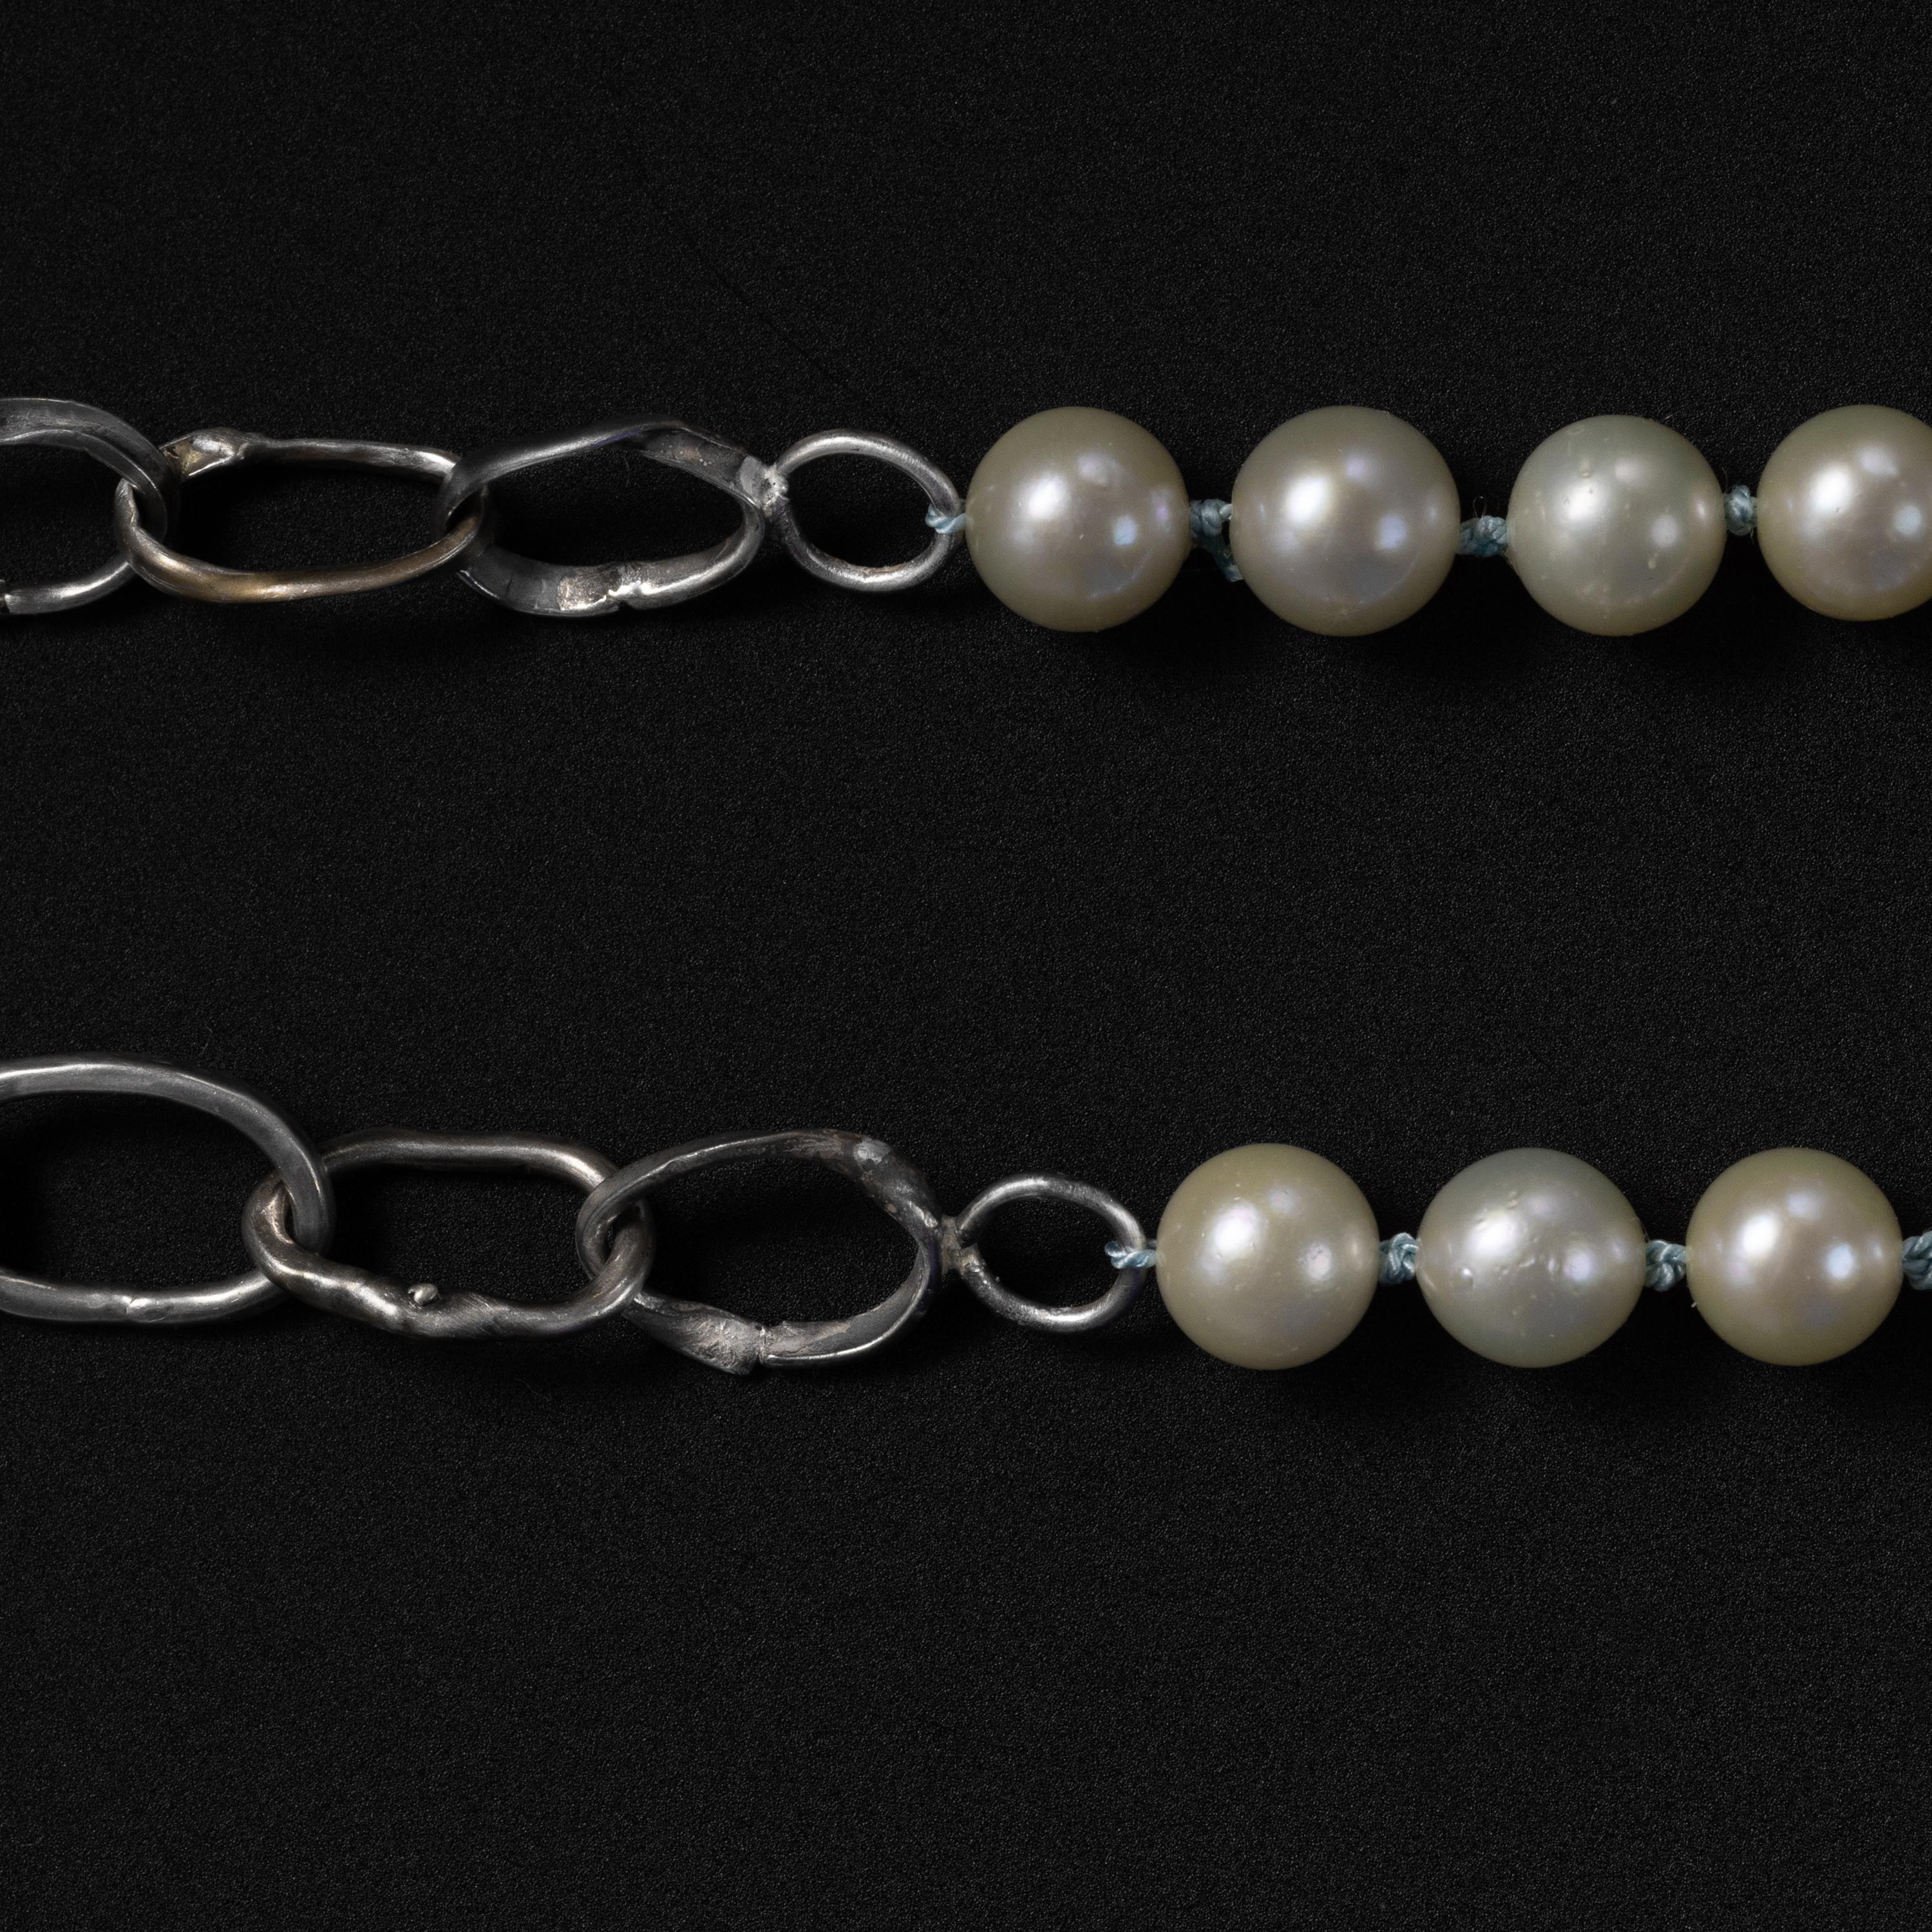 Unisex Akoya Pearl & Chain Necklace with Diamond New In New Condition For Sale In Southbury, CT